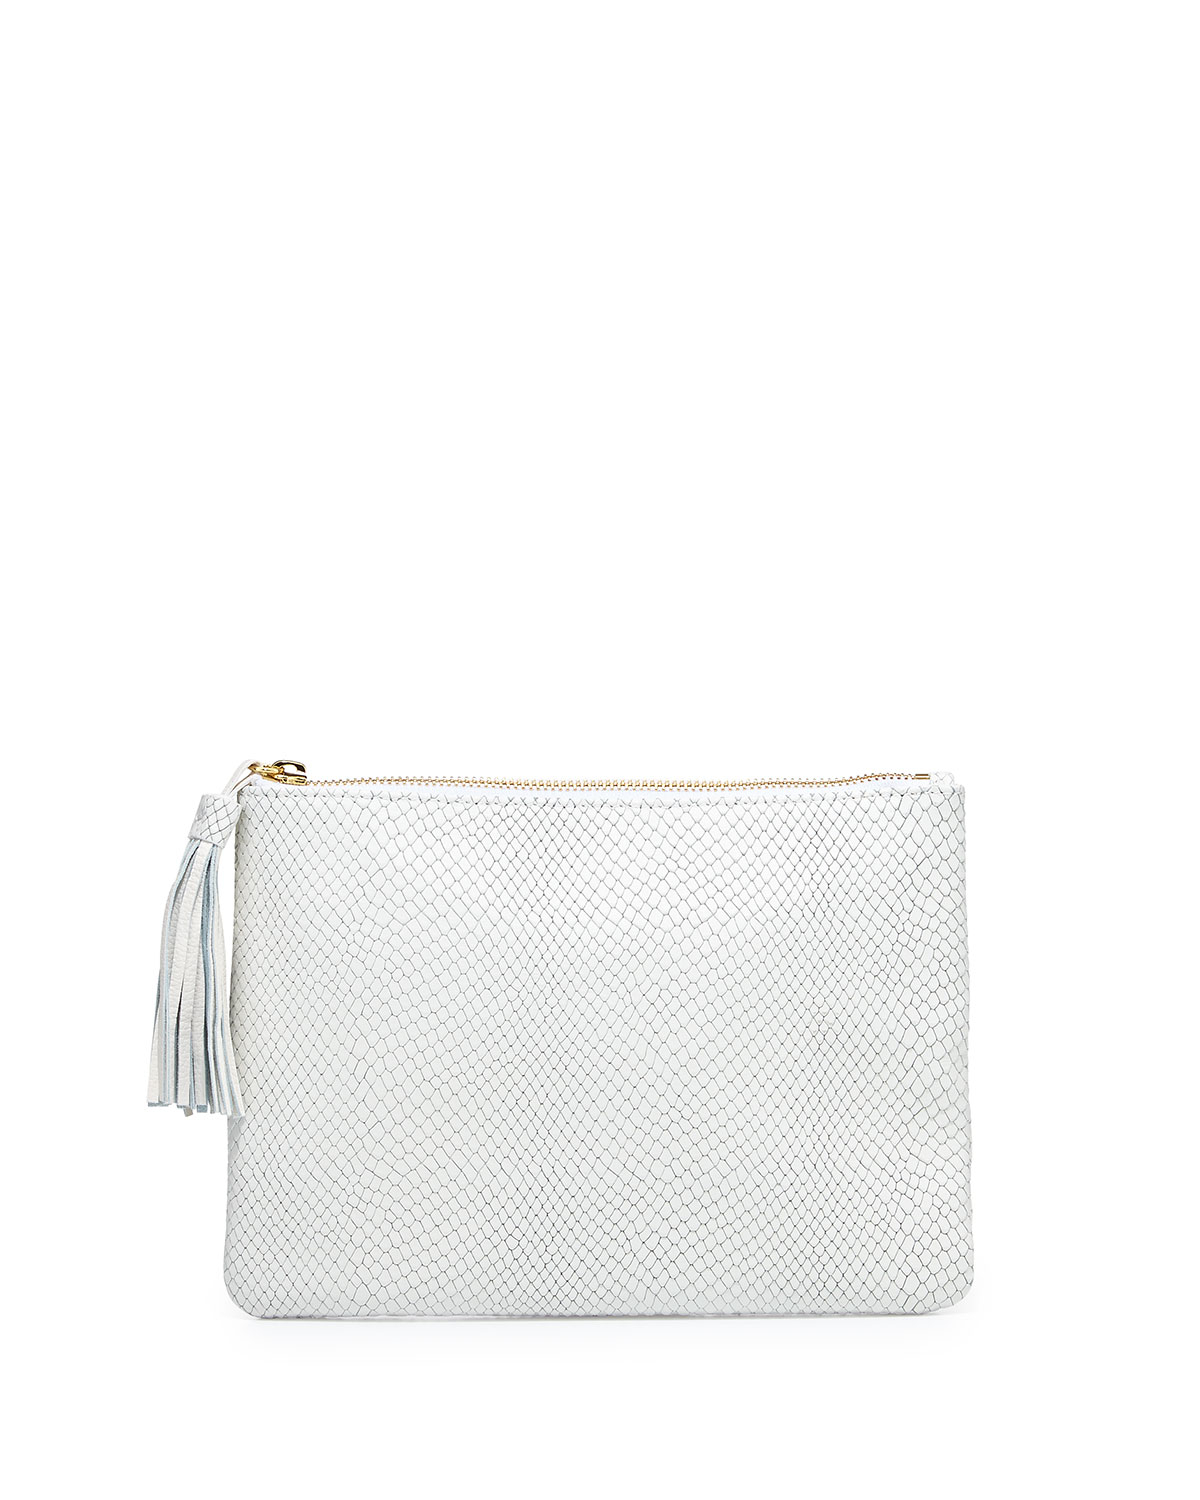 Lyst - Neiman Marcus Snake-embossed Clutch Bag in White